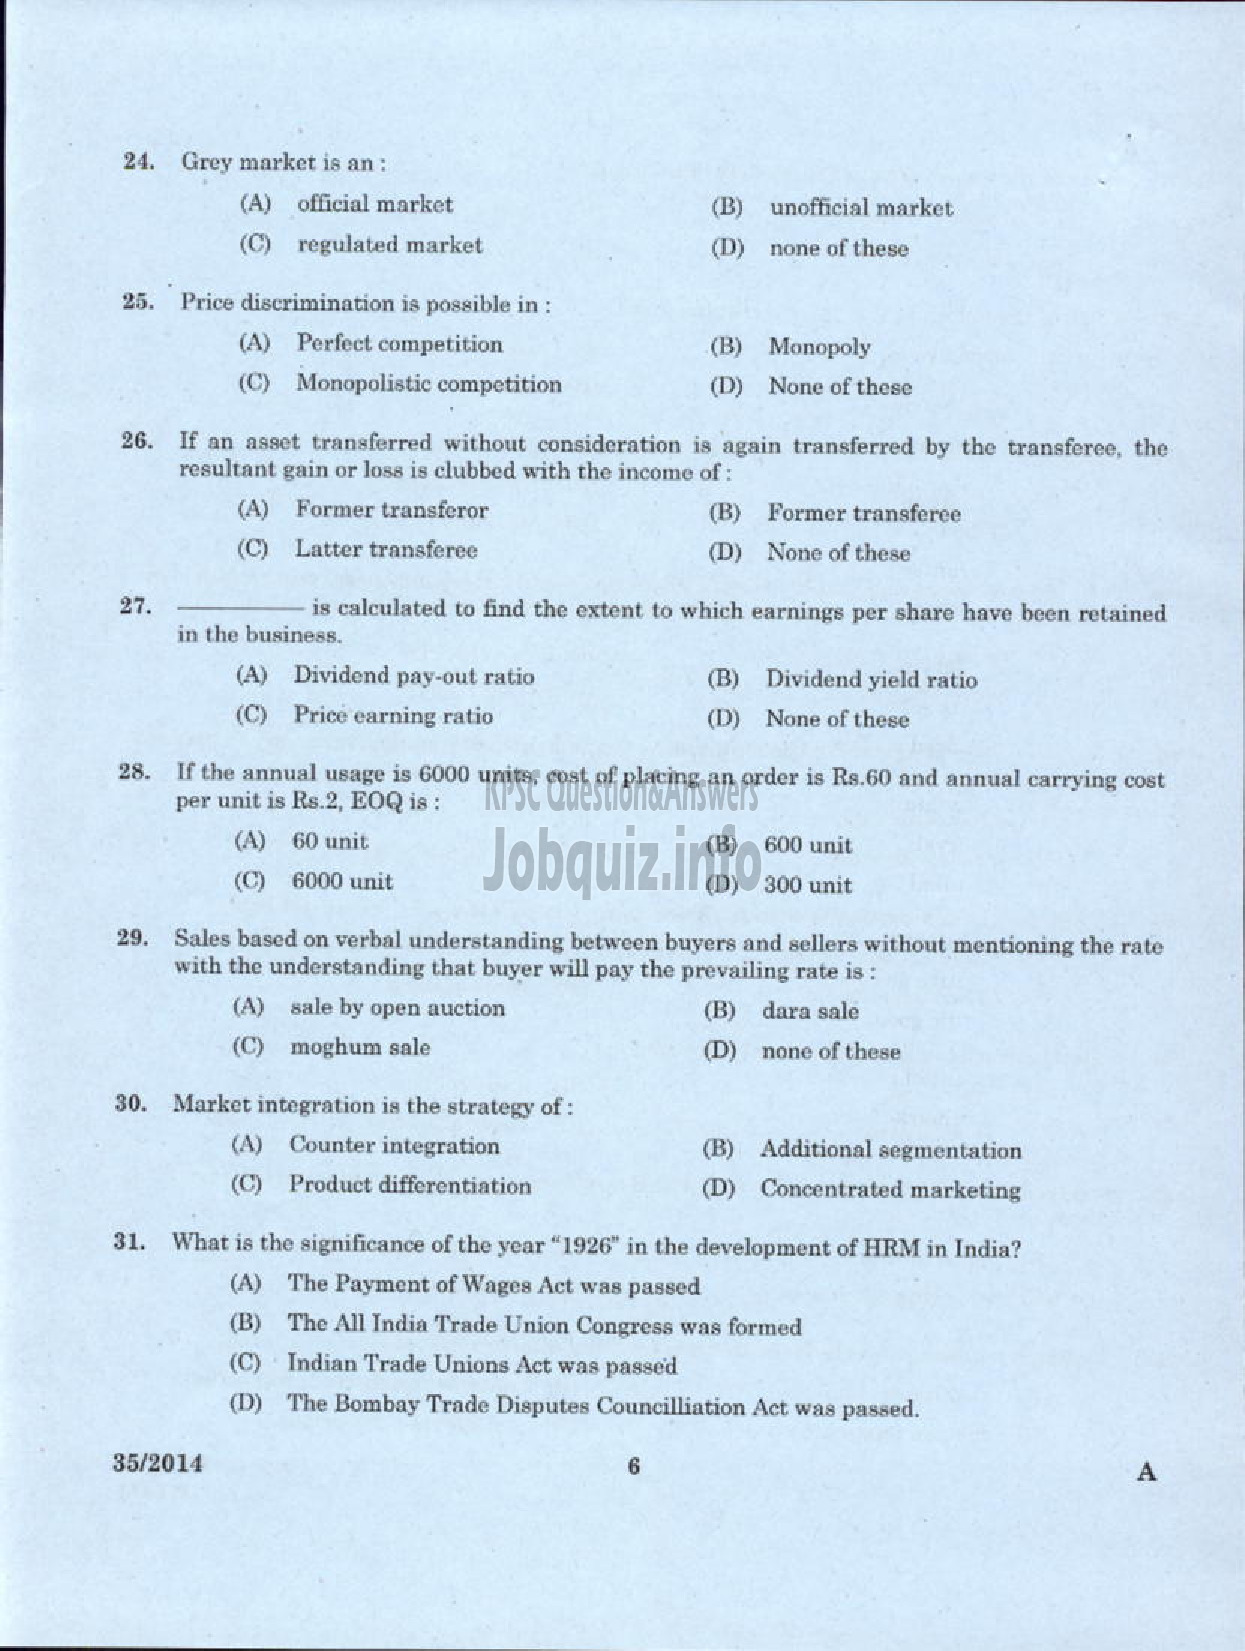 Kerala PSC Question Paper - JUNIOR ASSISTANT ACCOUNTS SR FOR ST ONLY TRAVANCORE COCHIN CHEMICALS LIMITED-4